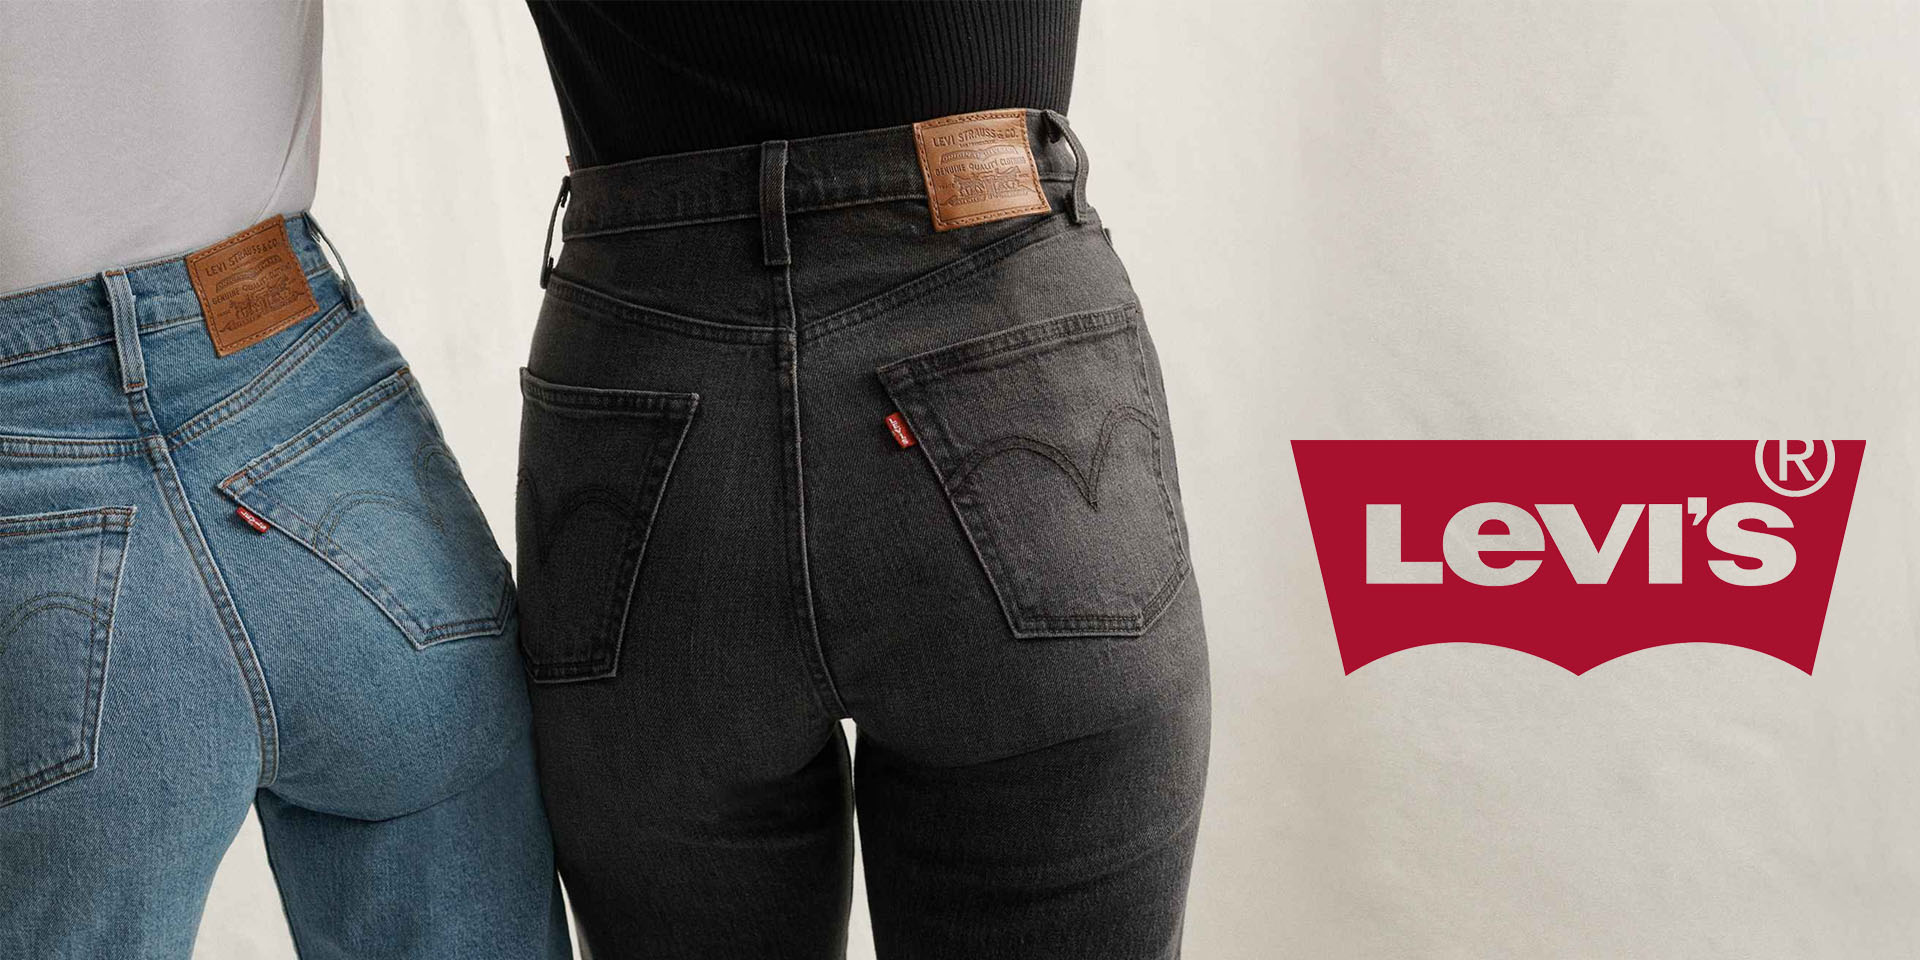 Oorzaak paar Efficiënt Levi's Exclusive Sale takes up to 75% off closeout styles with deals from $4